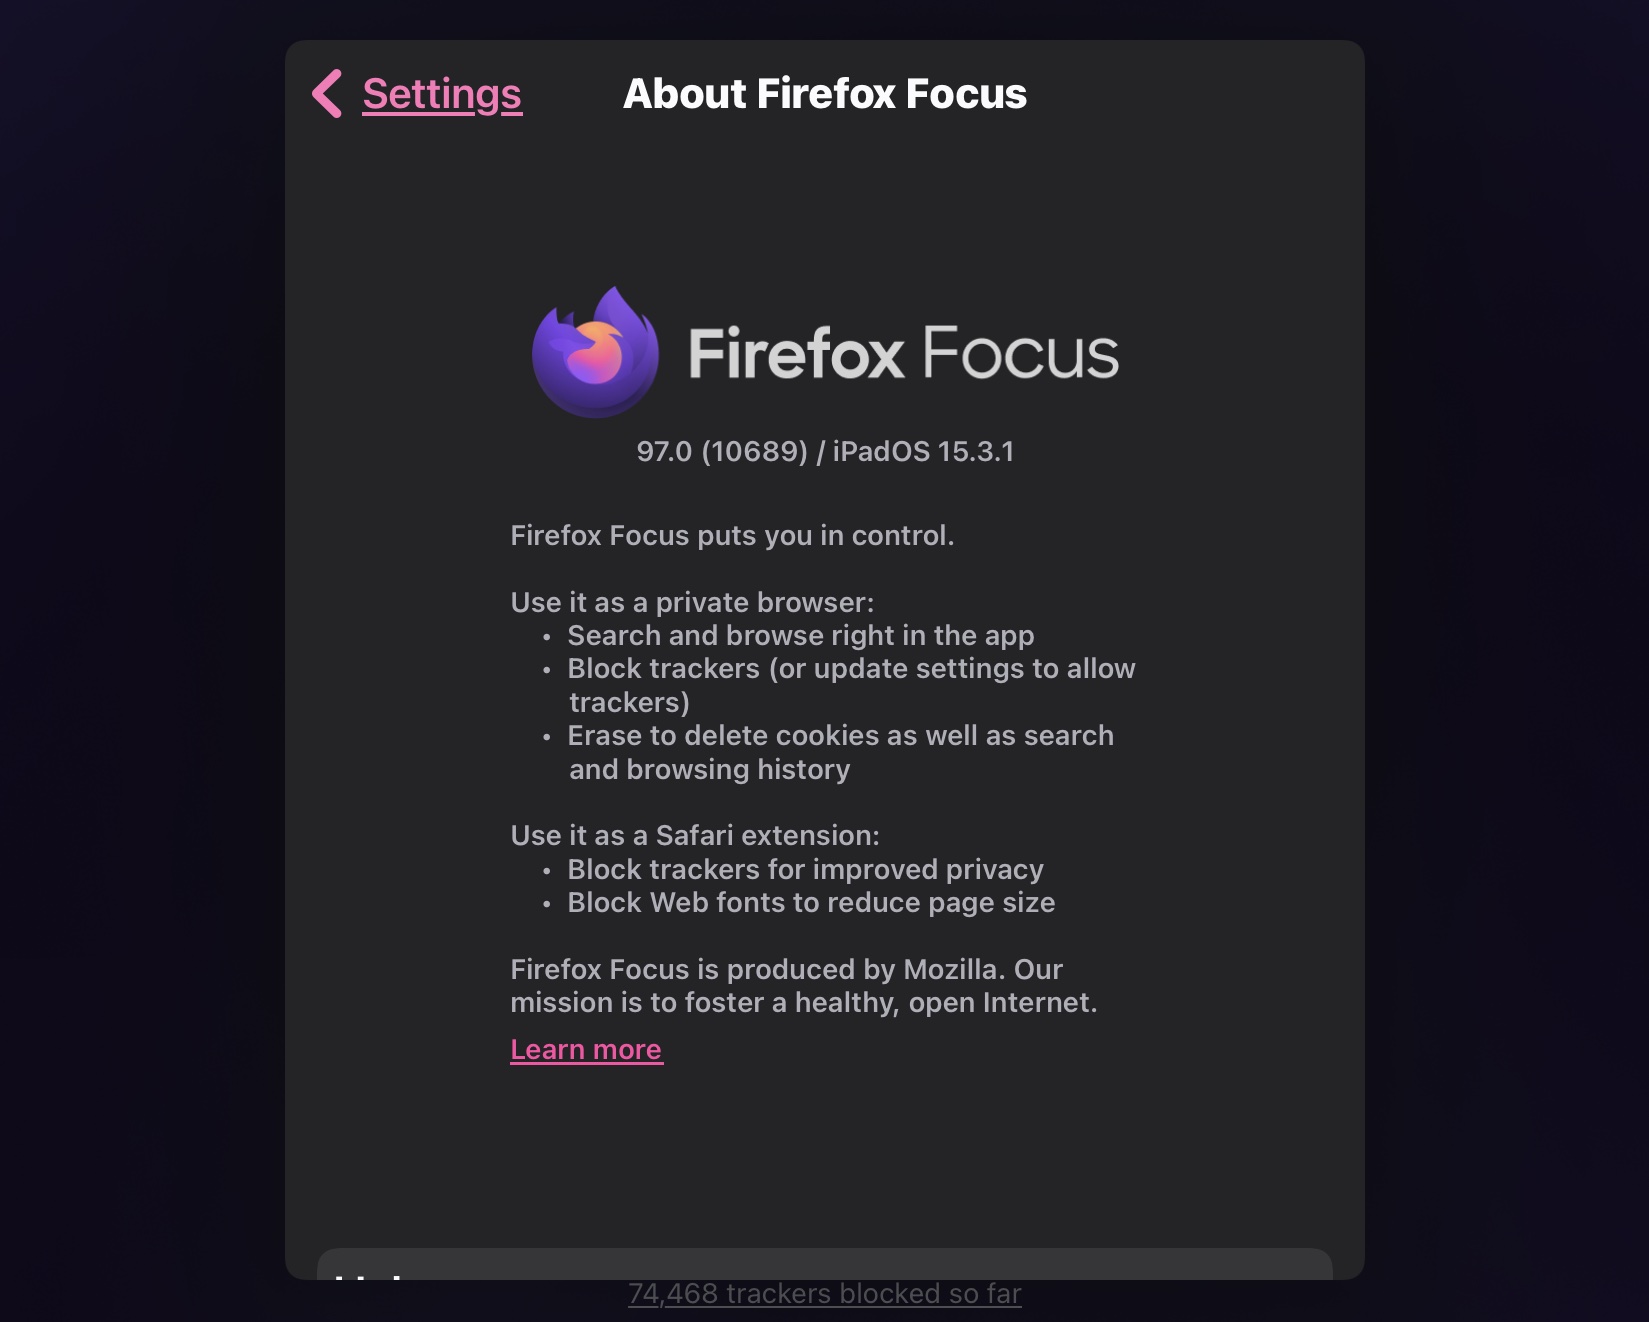 firefox-focus-what-it-is-and-how-to-use-it